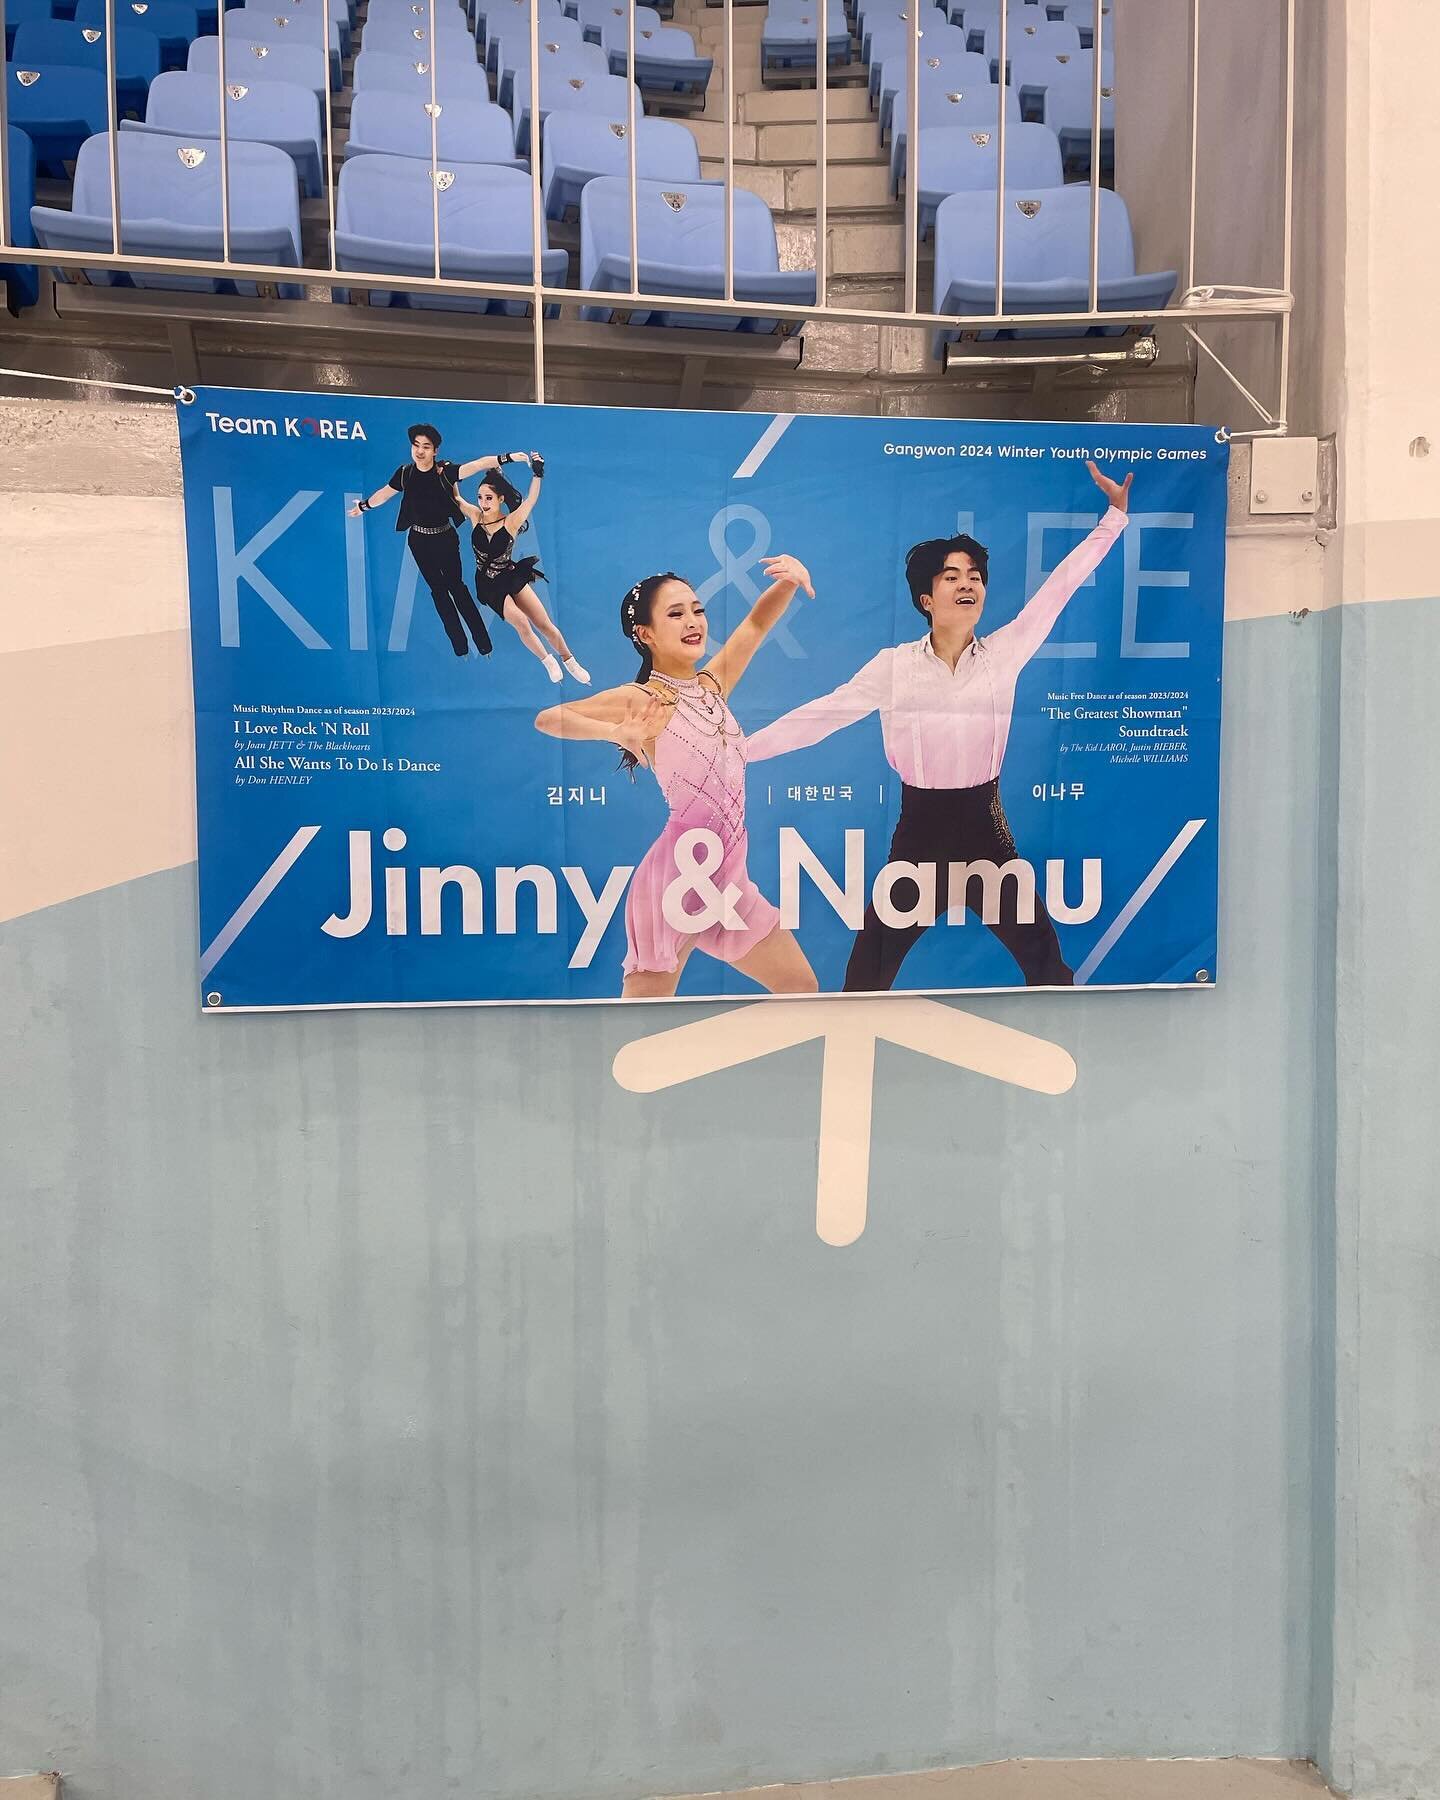 Last day today.  Team event good luck Jinny and Namu😀 #vancouvericedance #teamkorea #gangwon2024